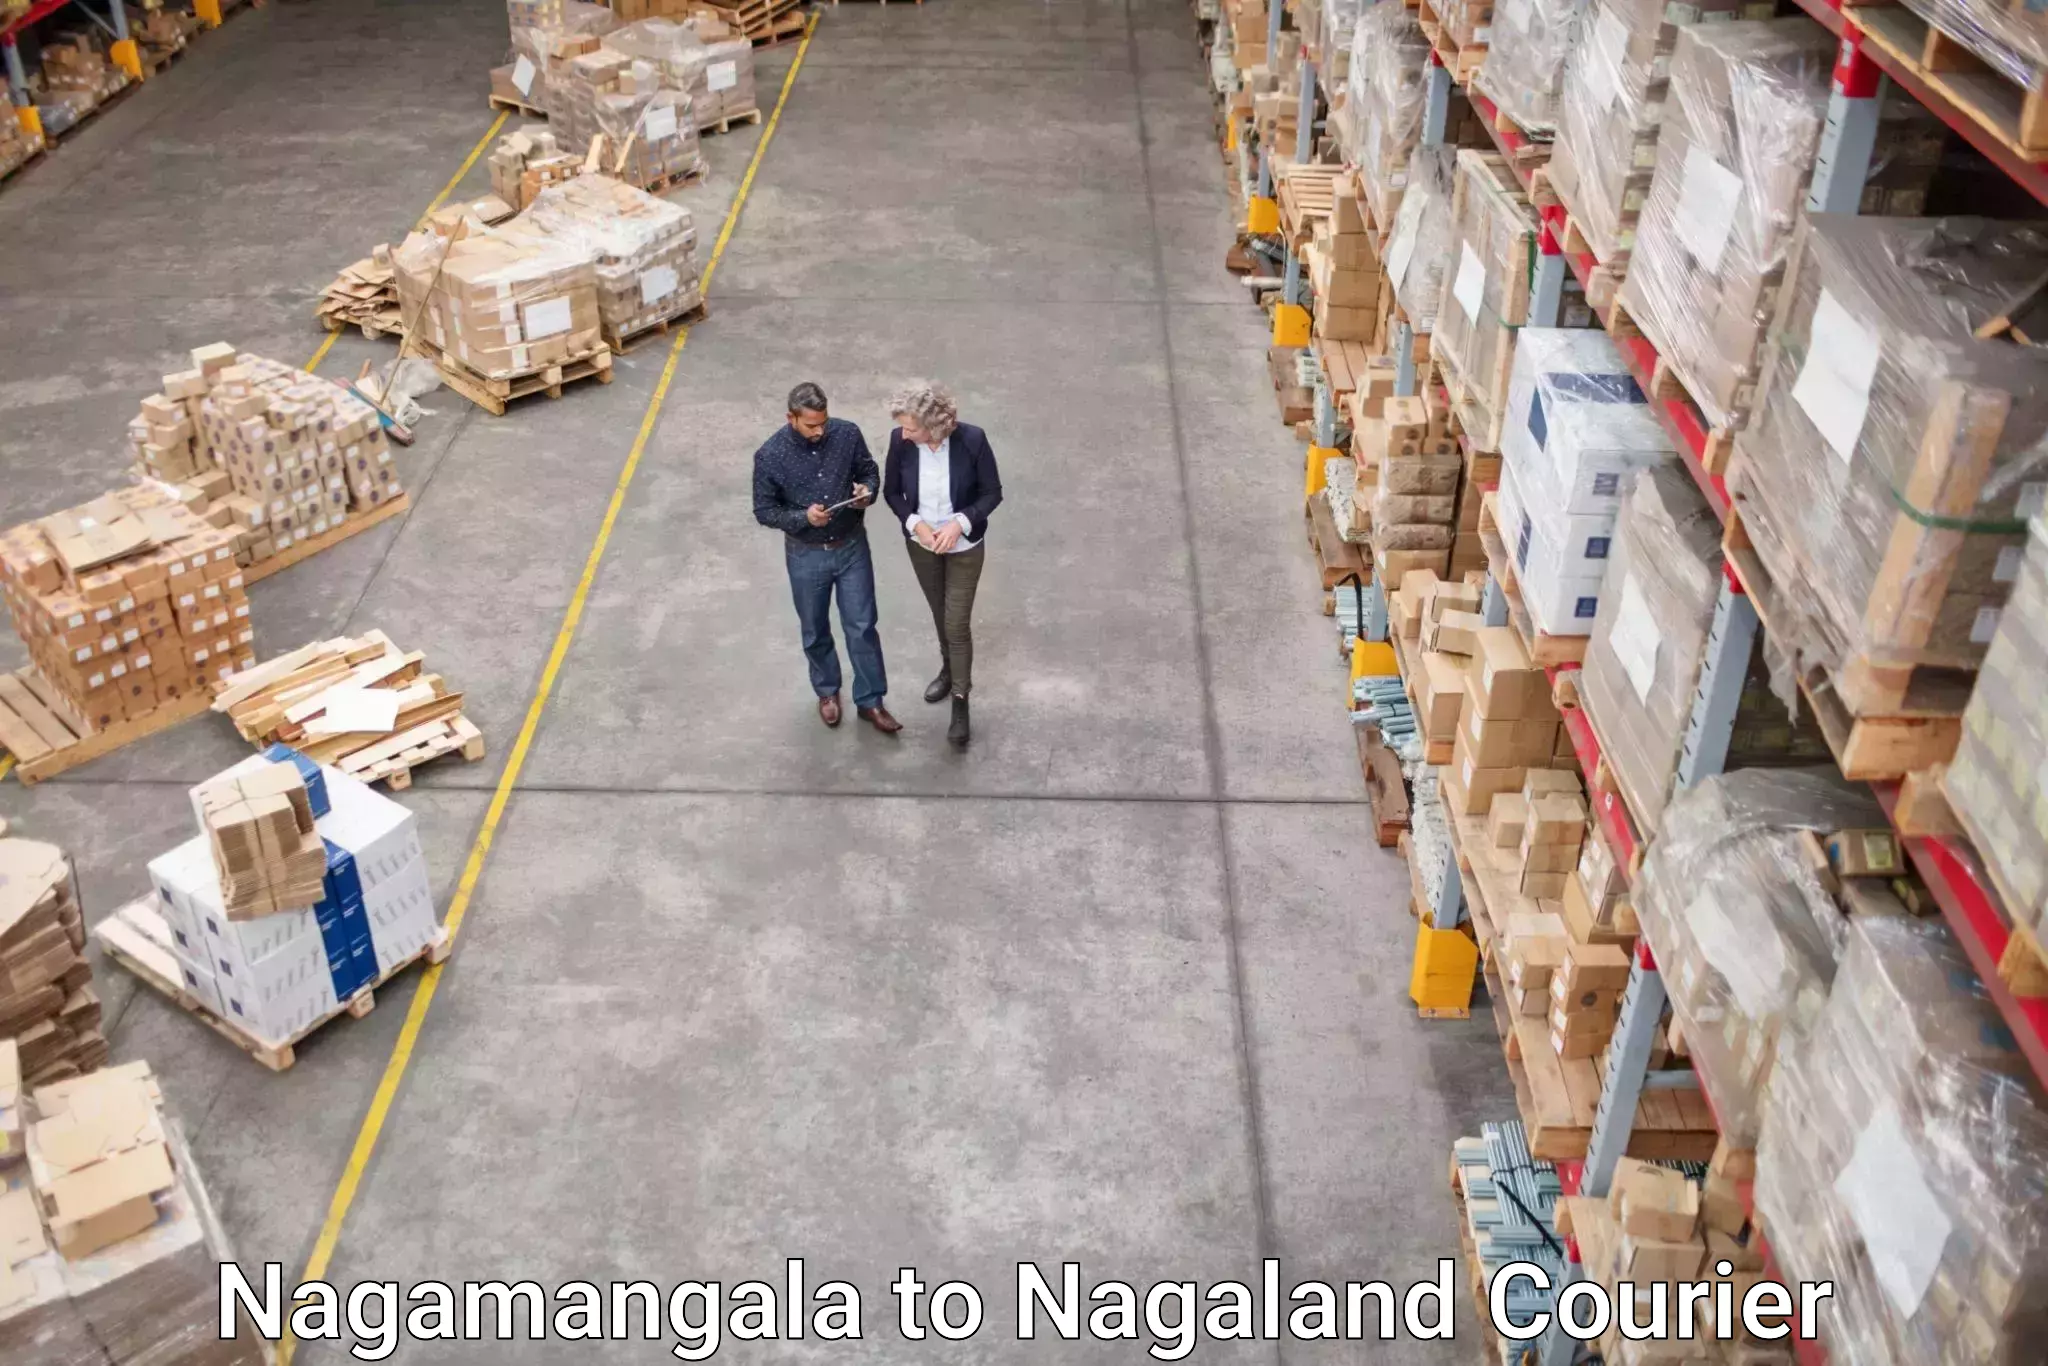 User-friendly courier app Nagamangala to Mon